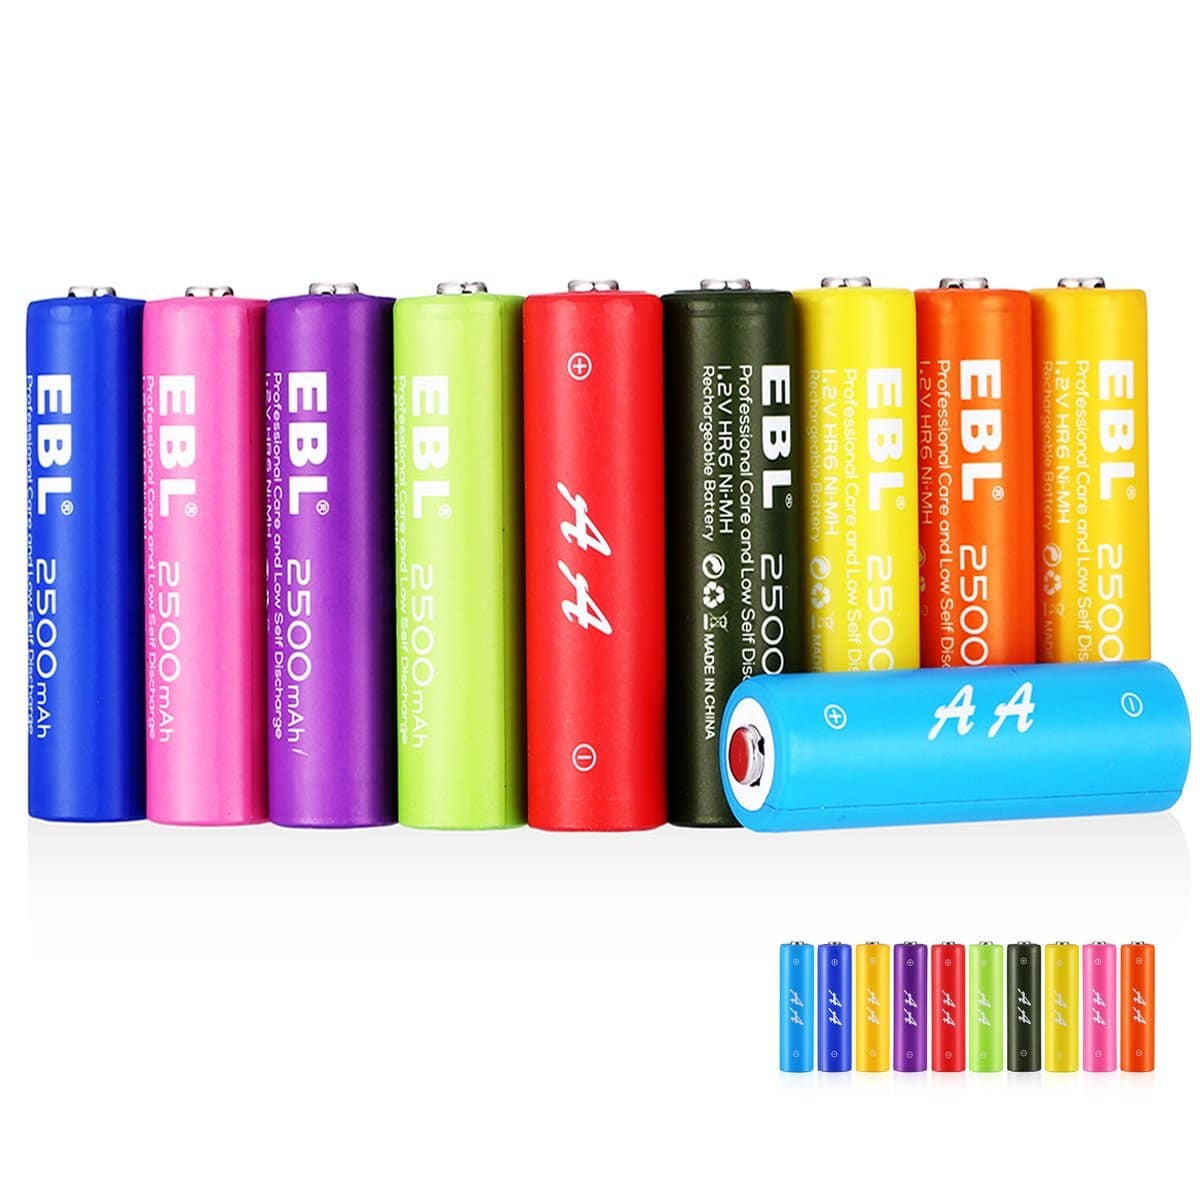 LIGHTNING DEAL ALERT! AA Rechargeable Batteries Home Basic Combo Tropical Color 10 Packs – 71% off